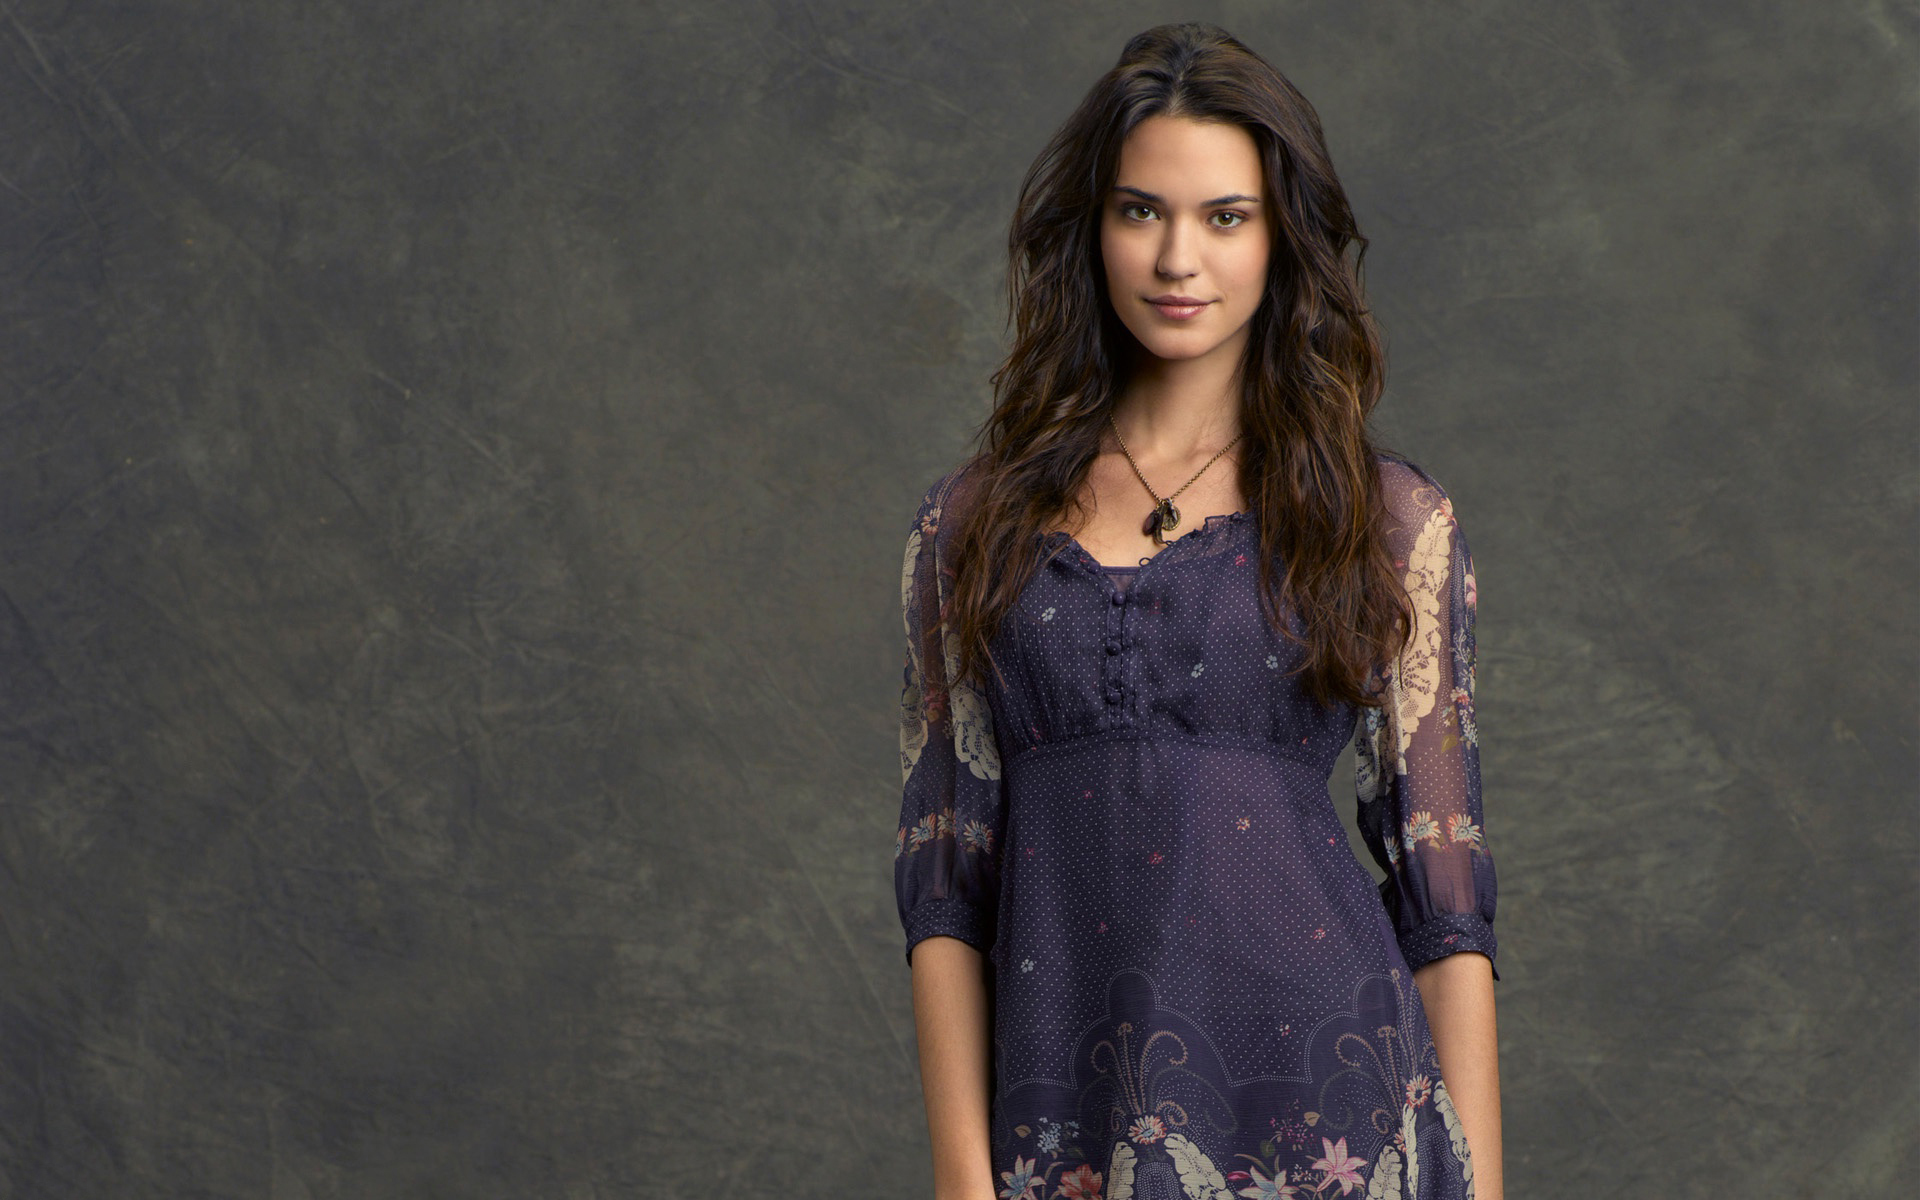 Odette Annable Wallpaper Image Photos Pictures Background